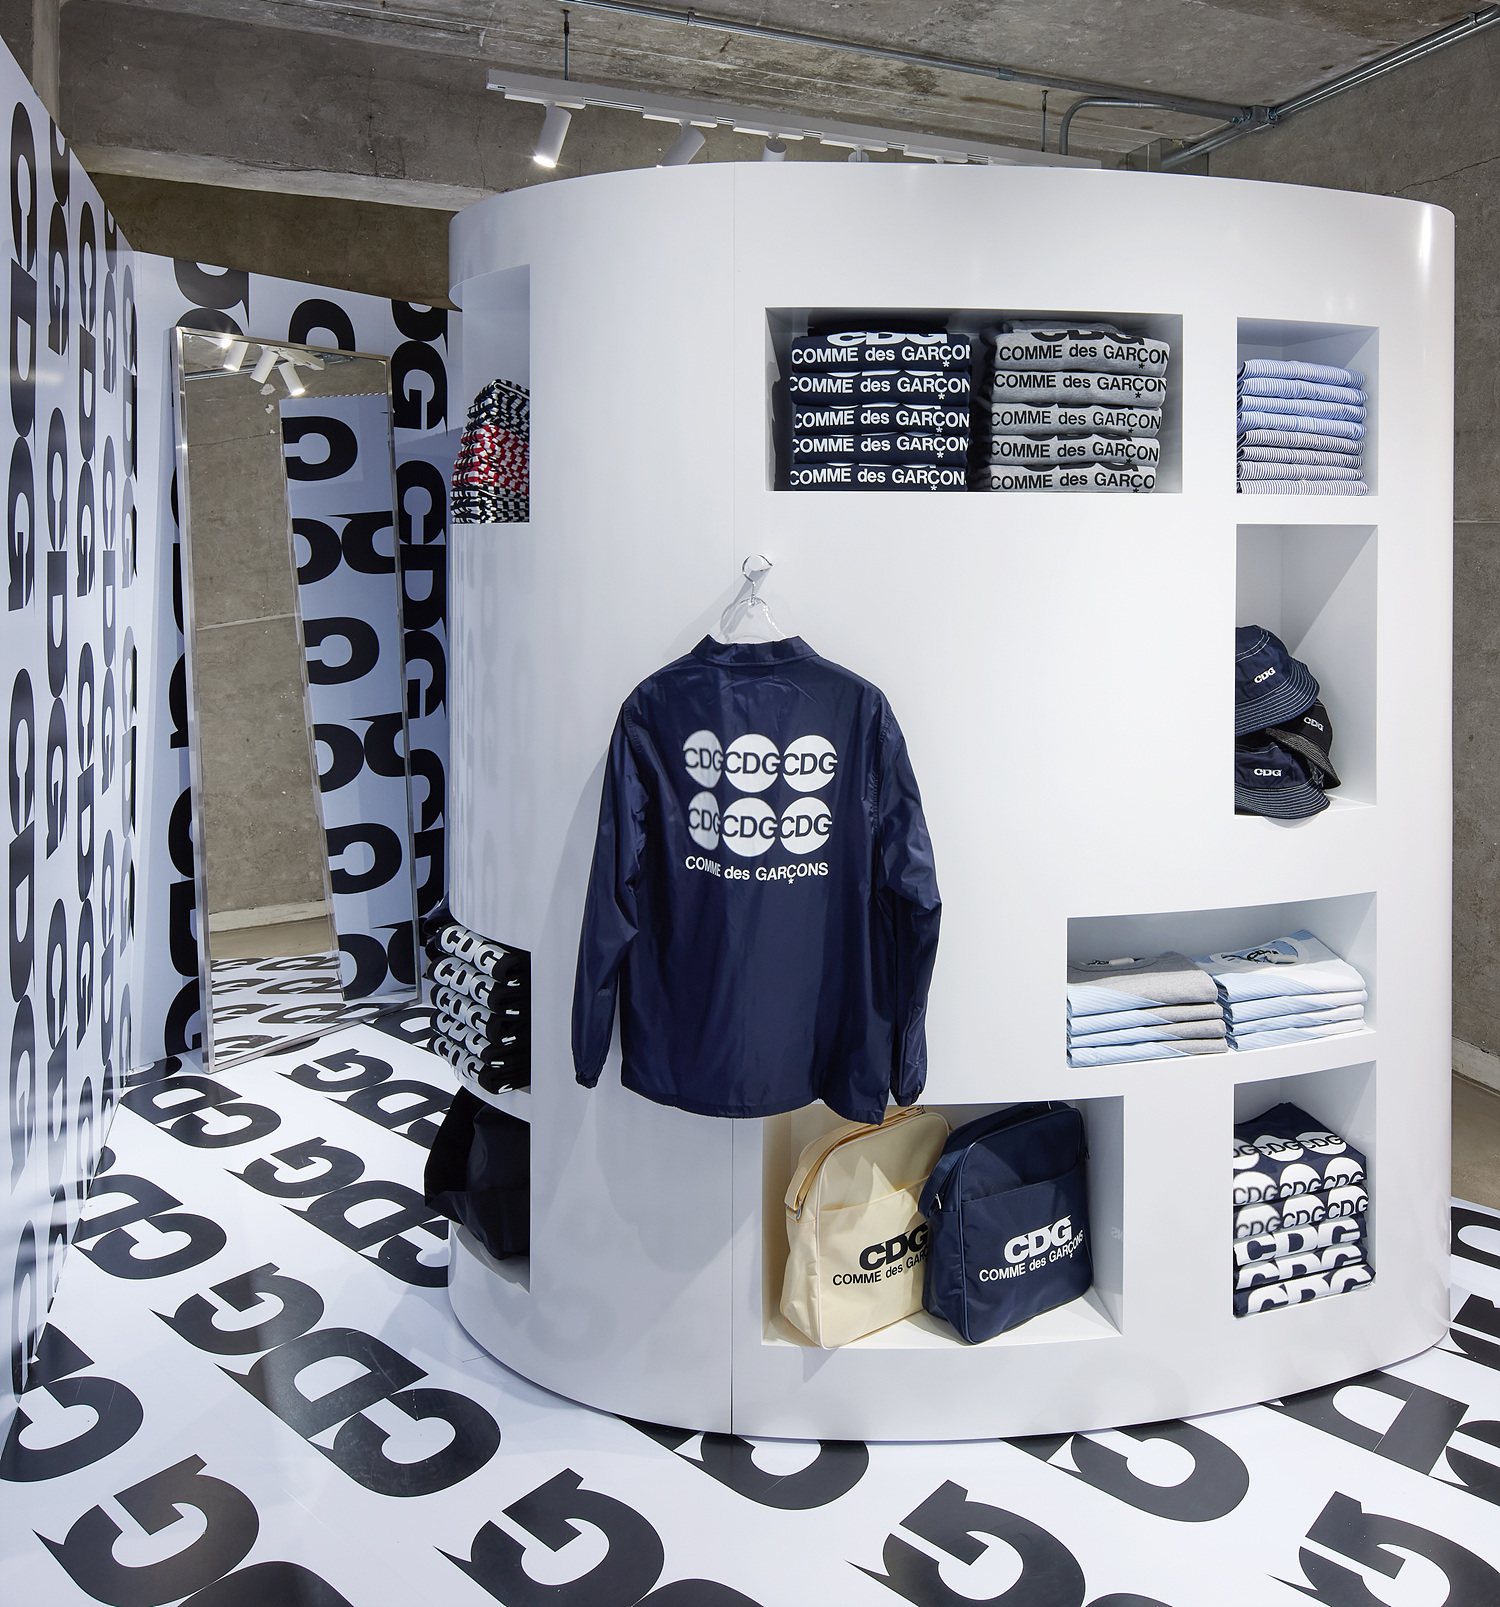 The store has well-known CDG items as well as new products shown for the first time.